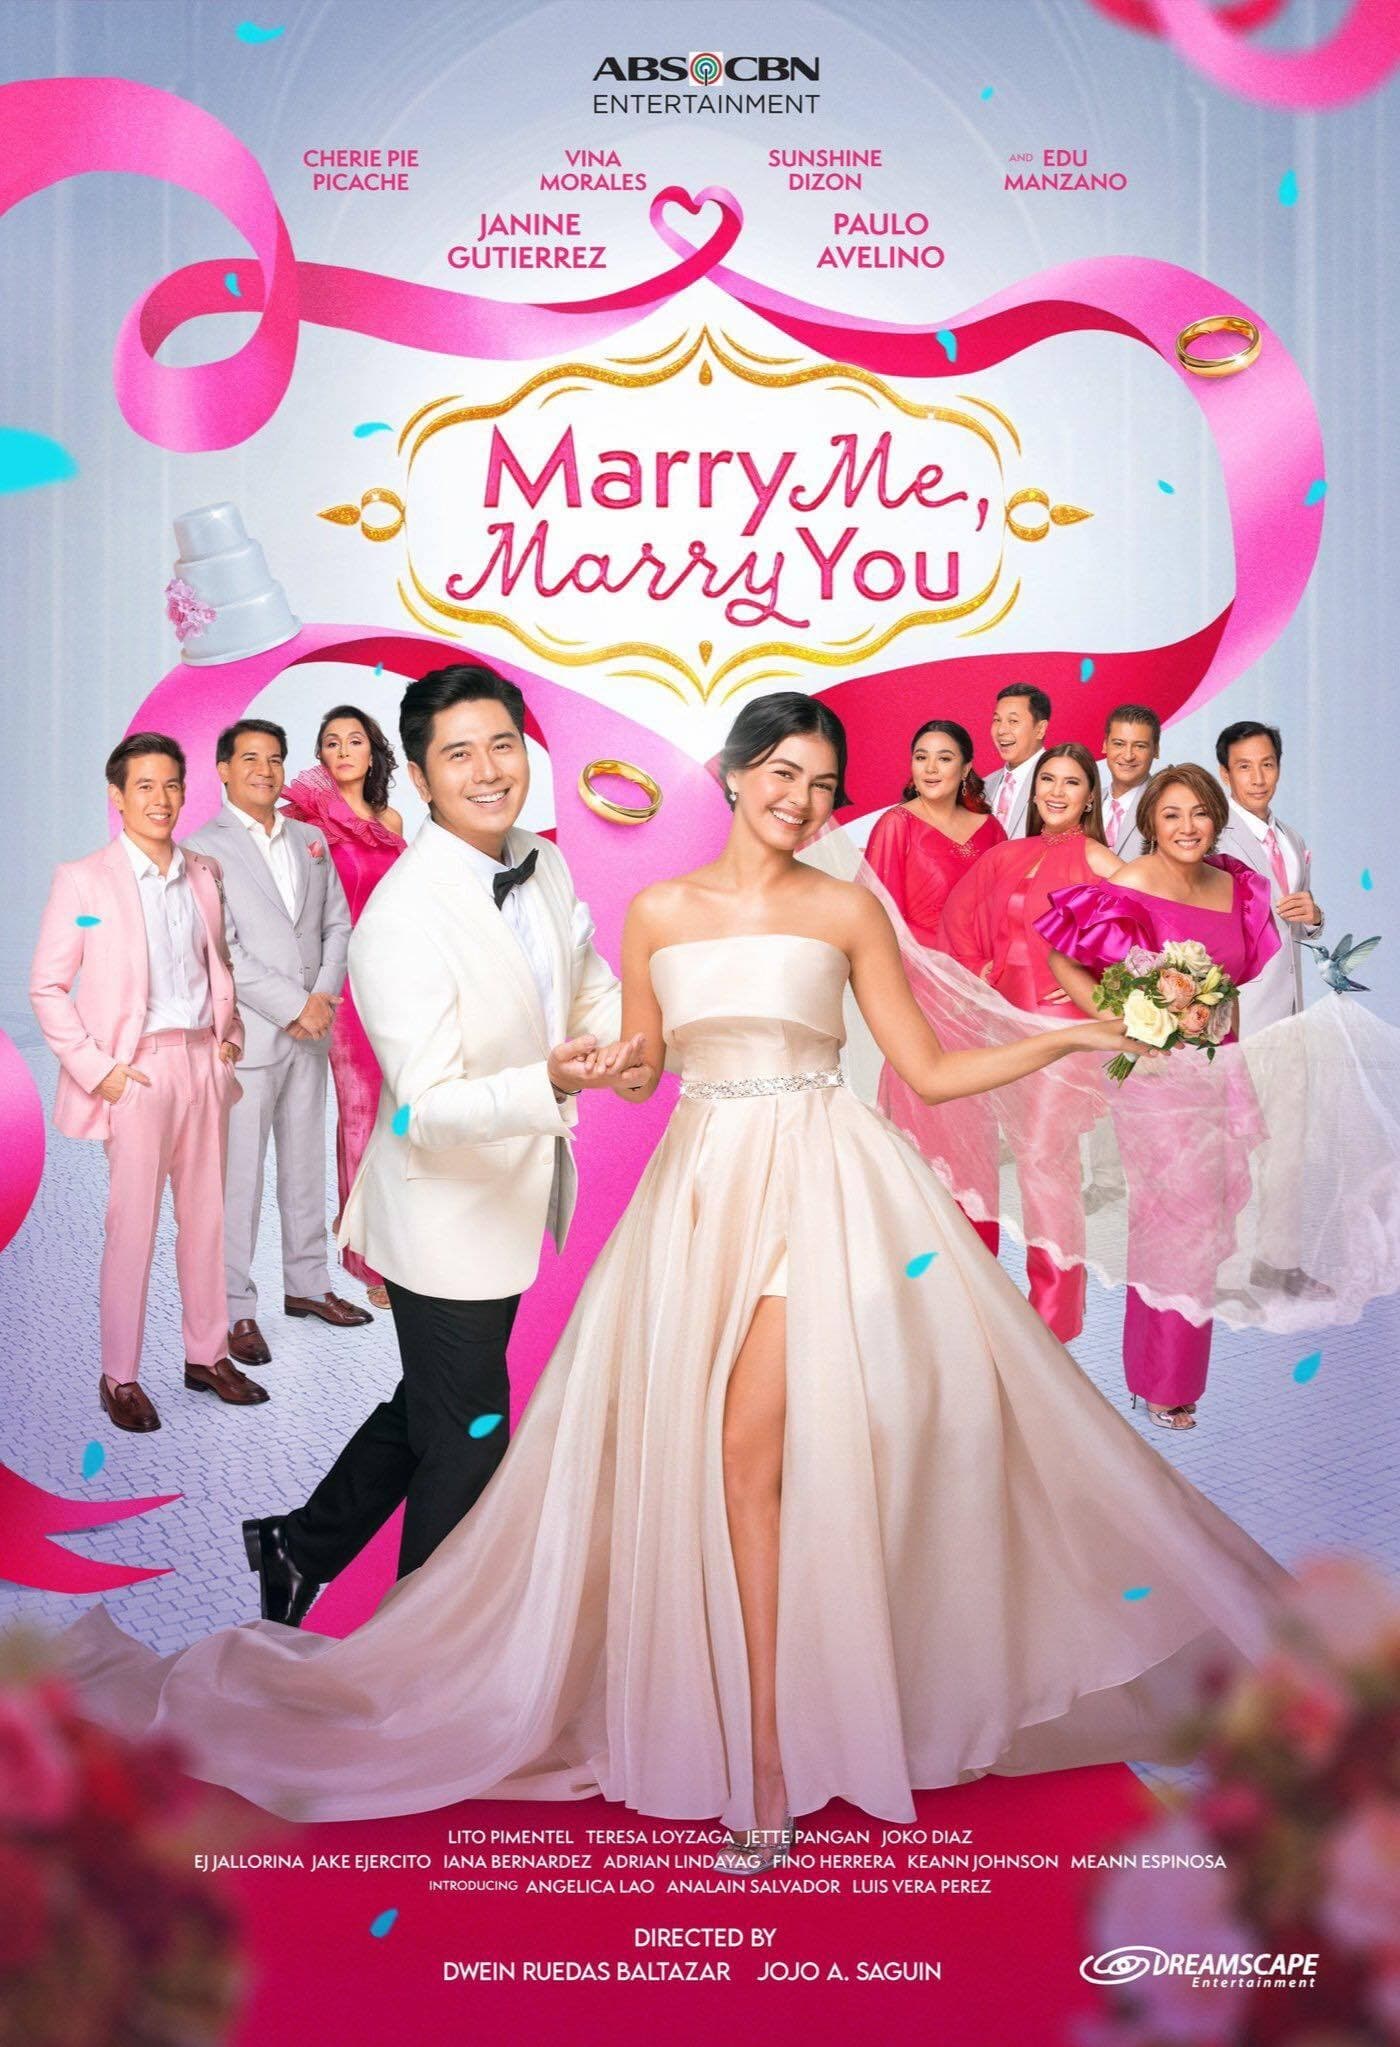 Marry Me, Marry You TV Shows About Marriage